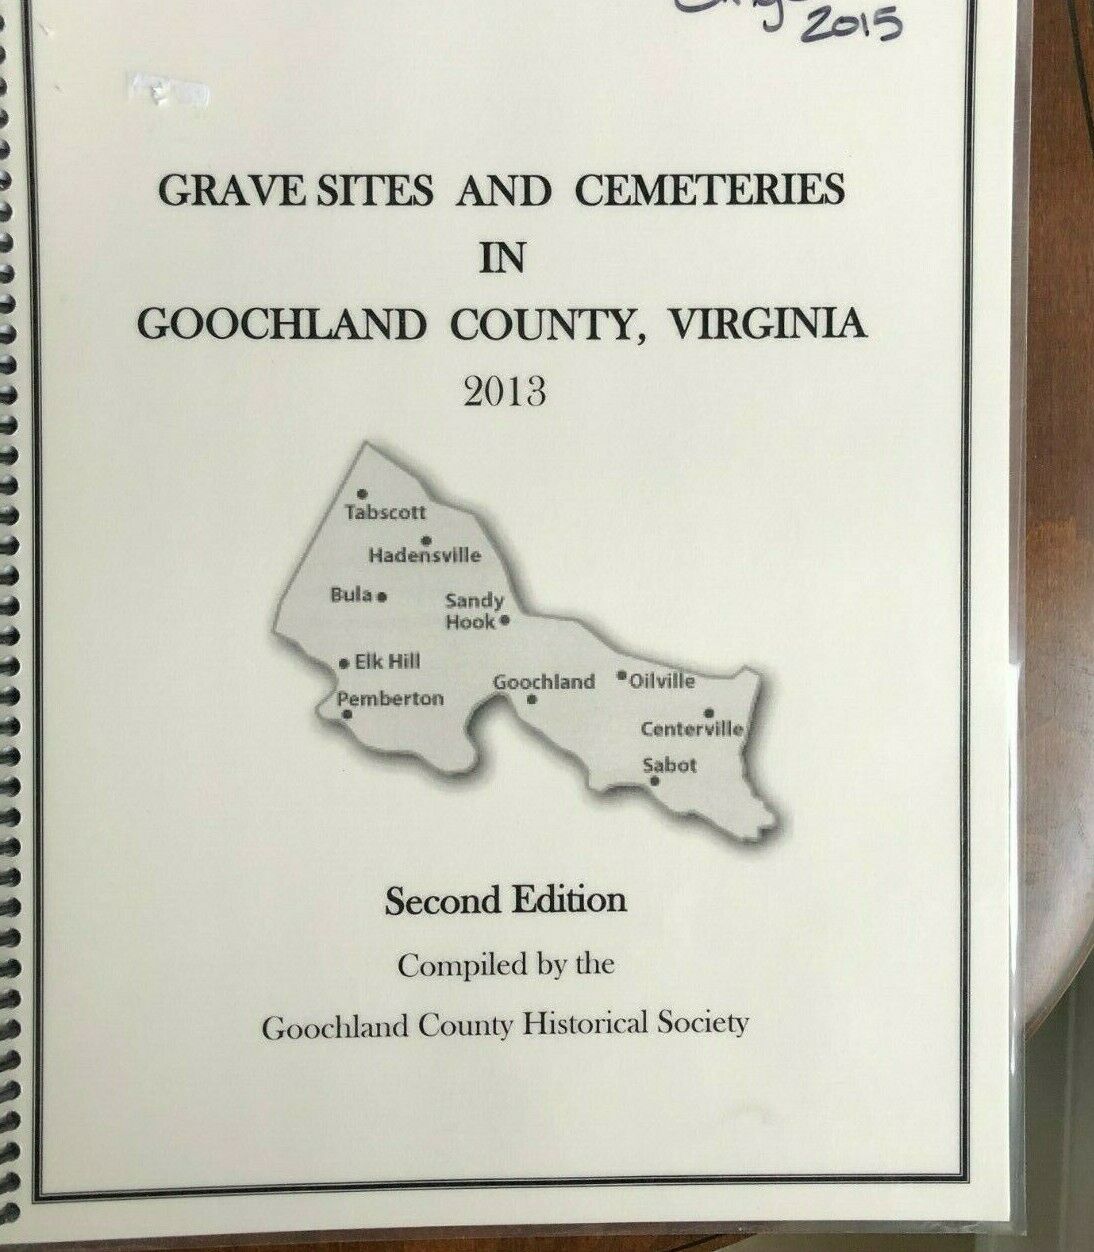 Grave Sites And Cemeteries In Goochland County, Virginia 2013